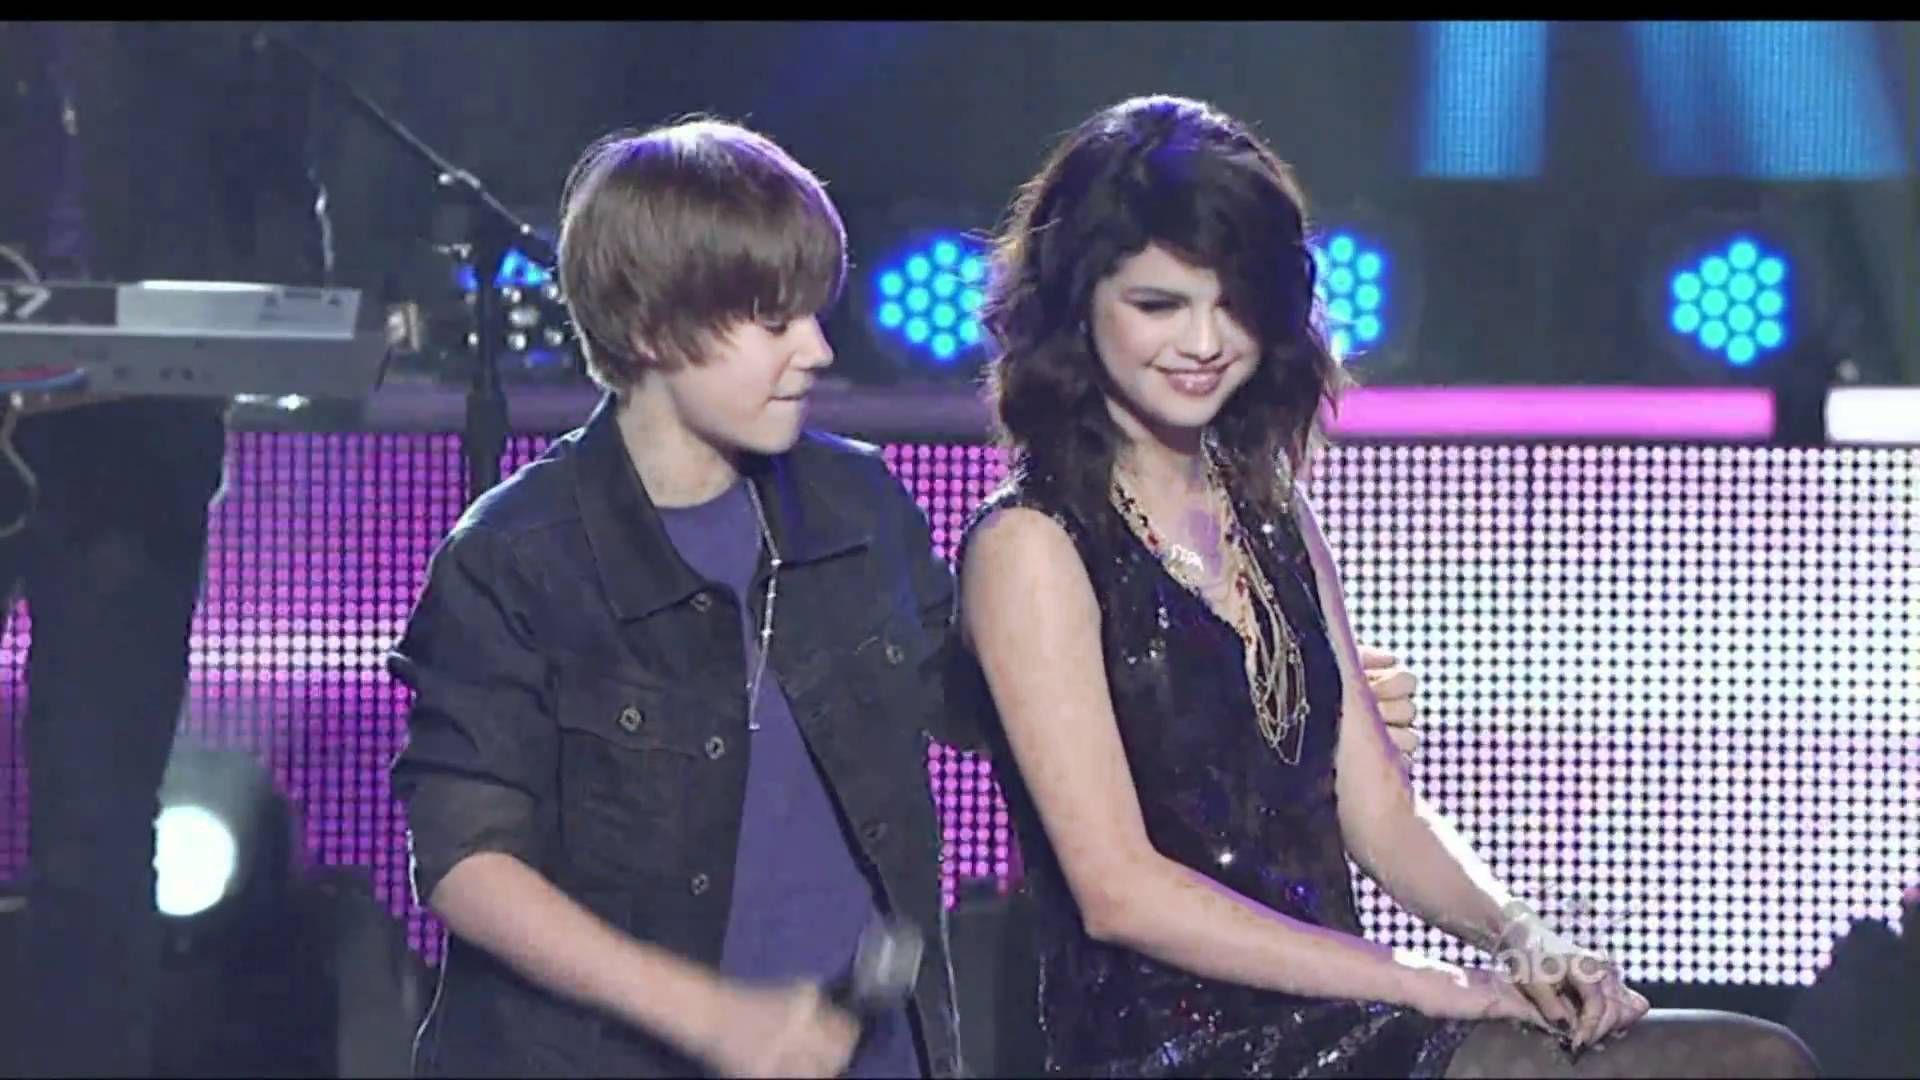 Justin Bieber Singing To Selena Gomez On Stage Less Lonely